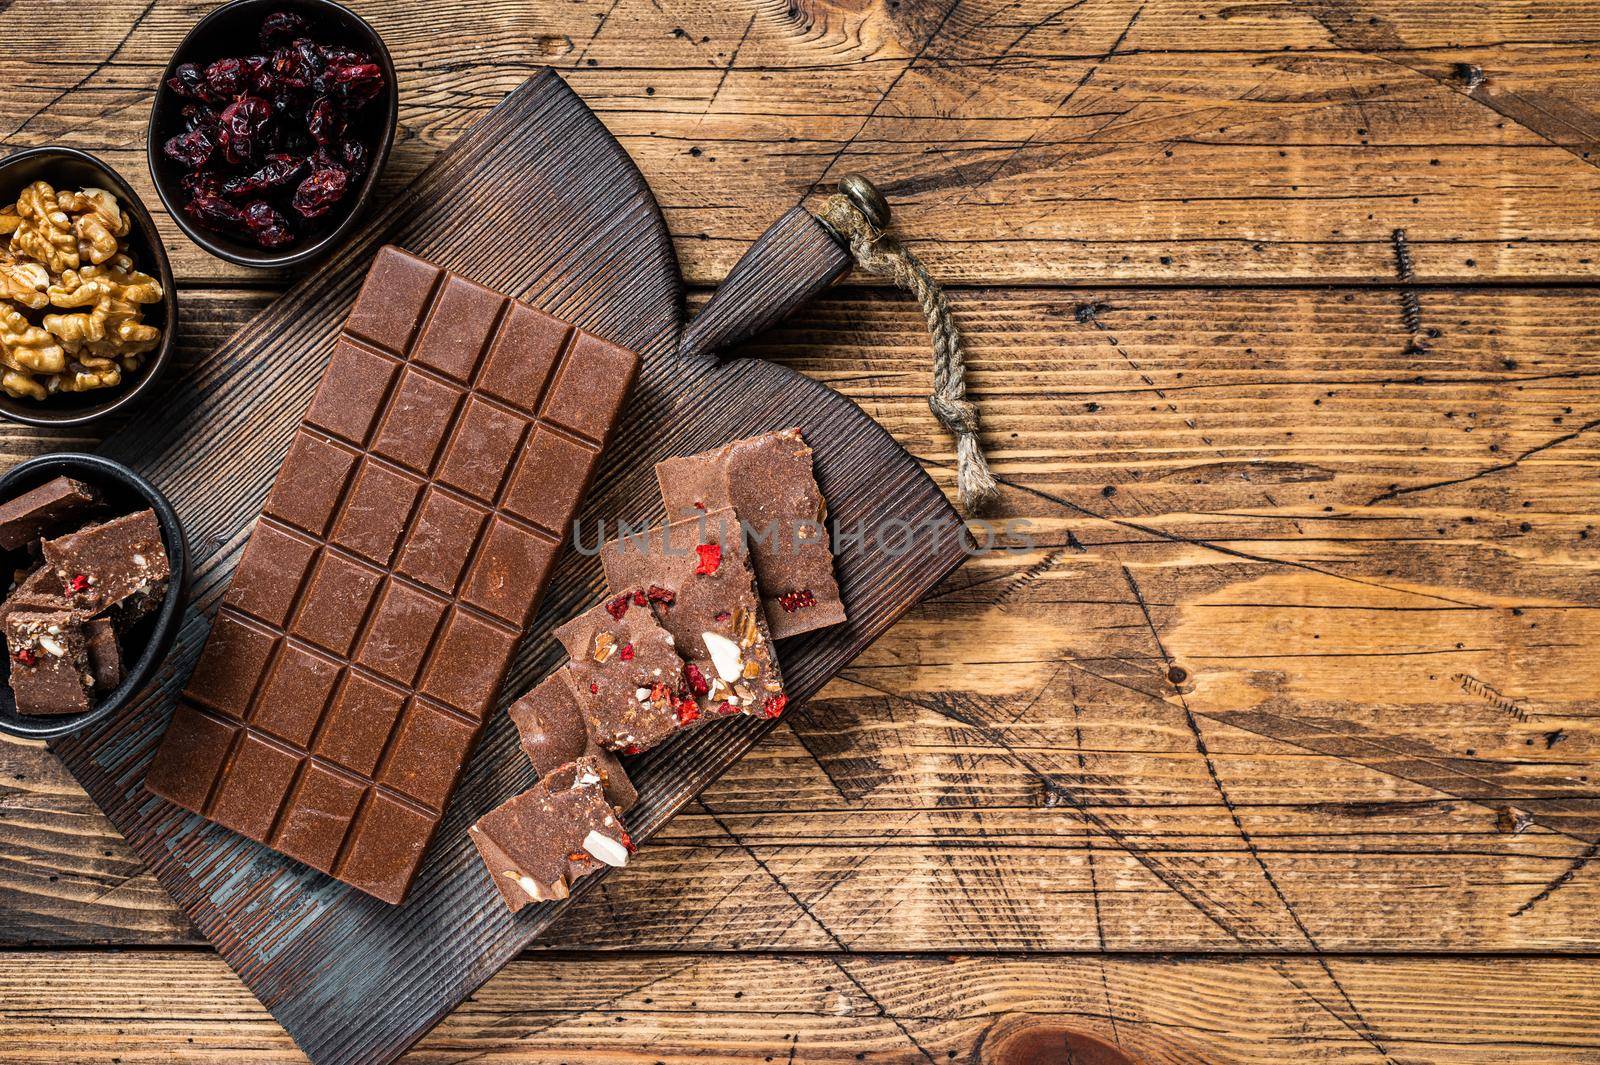 Dark chocolate bar with hazelnuts, peanuts, cranberries and freeze dried raspberries on a wooden board. wooden background. Top view. Copy space.